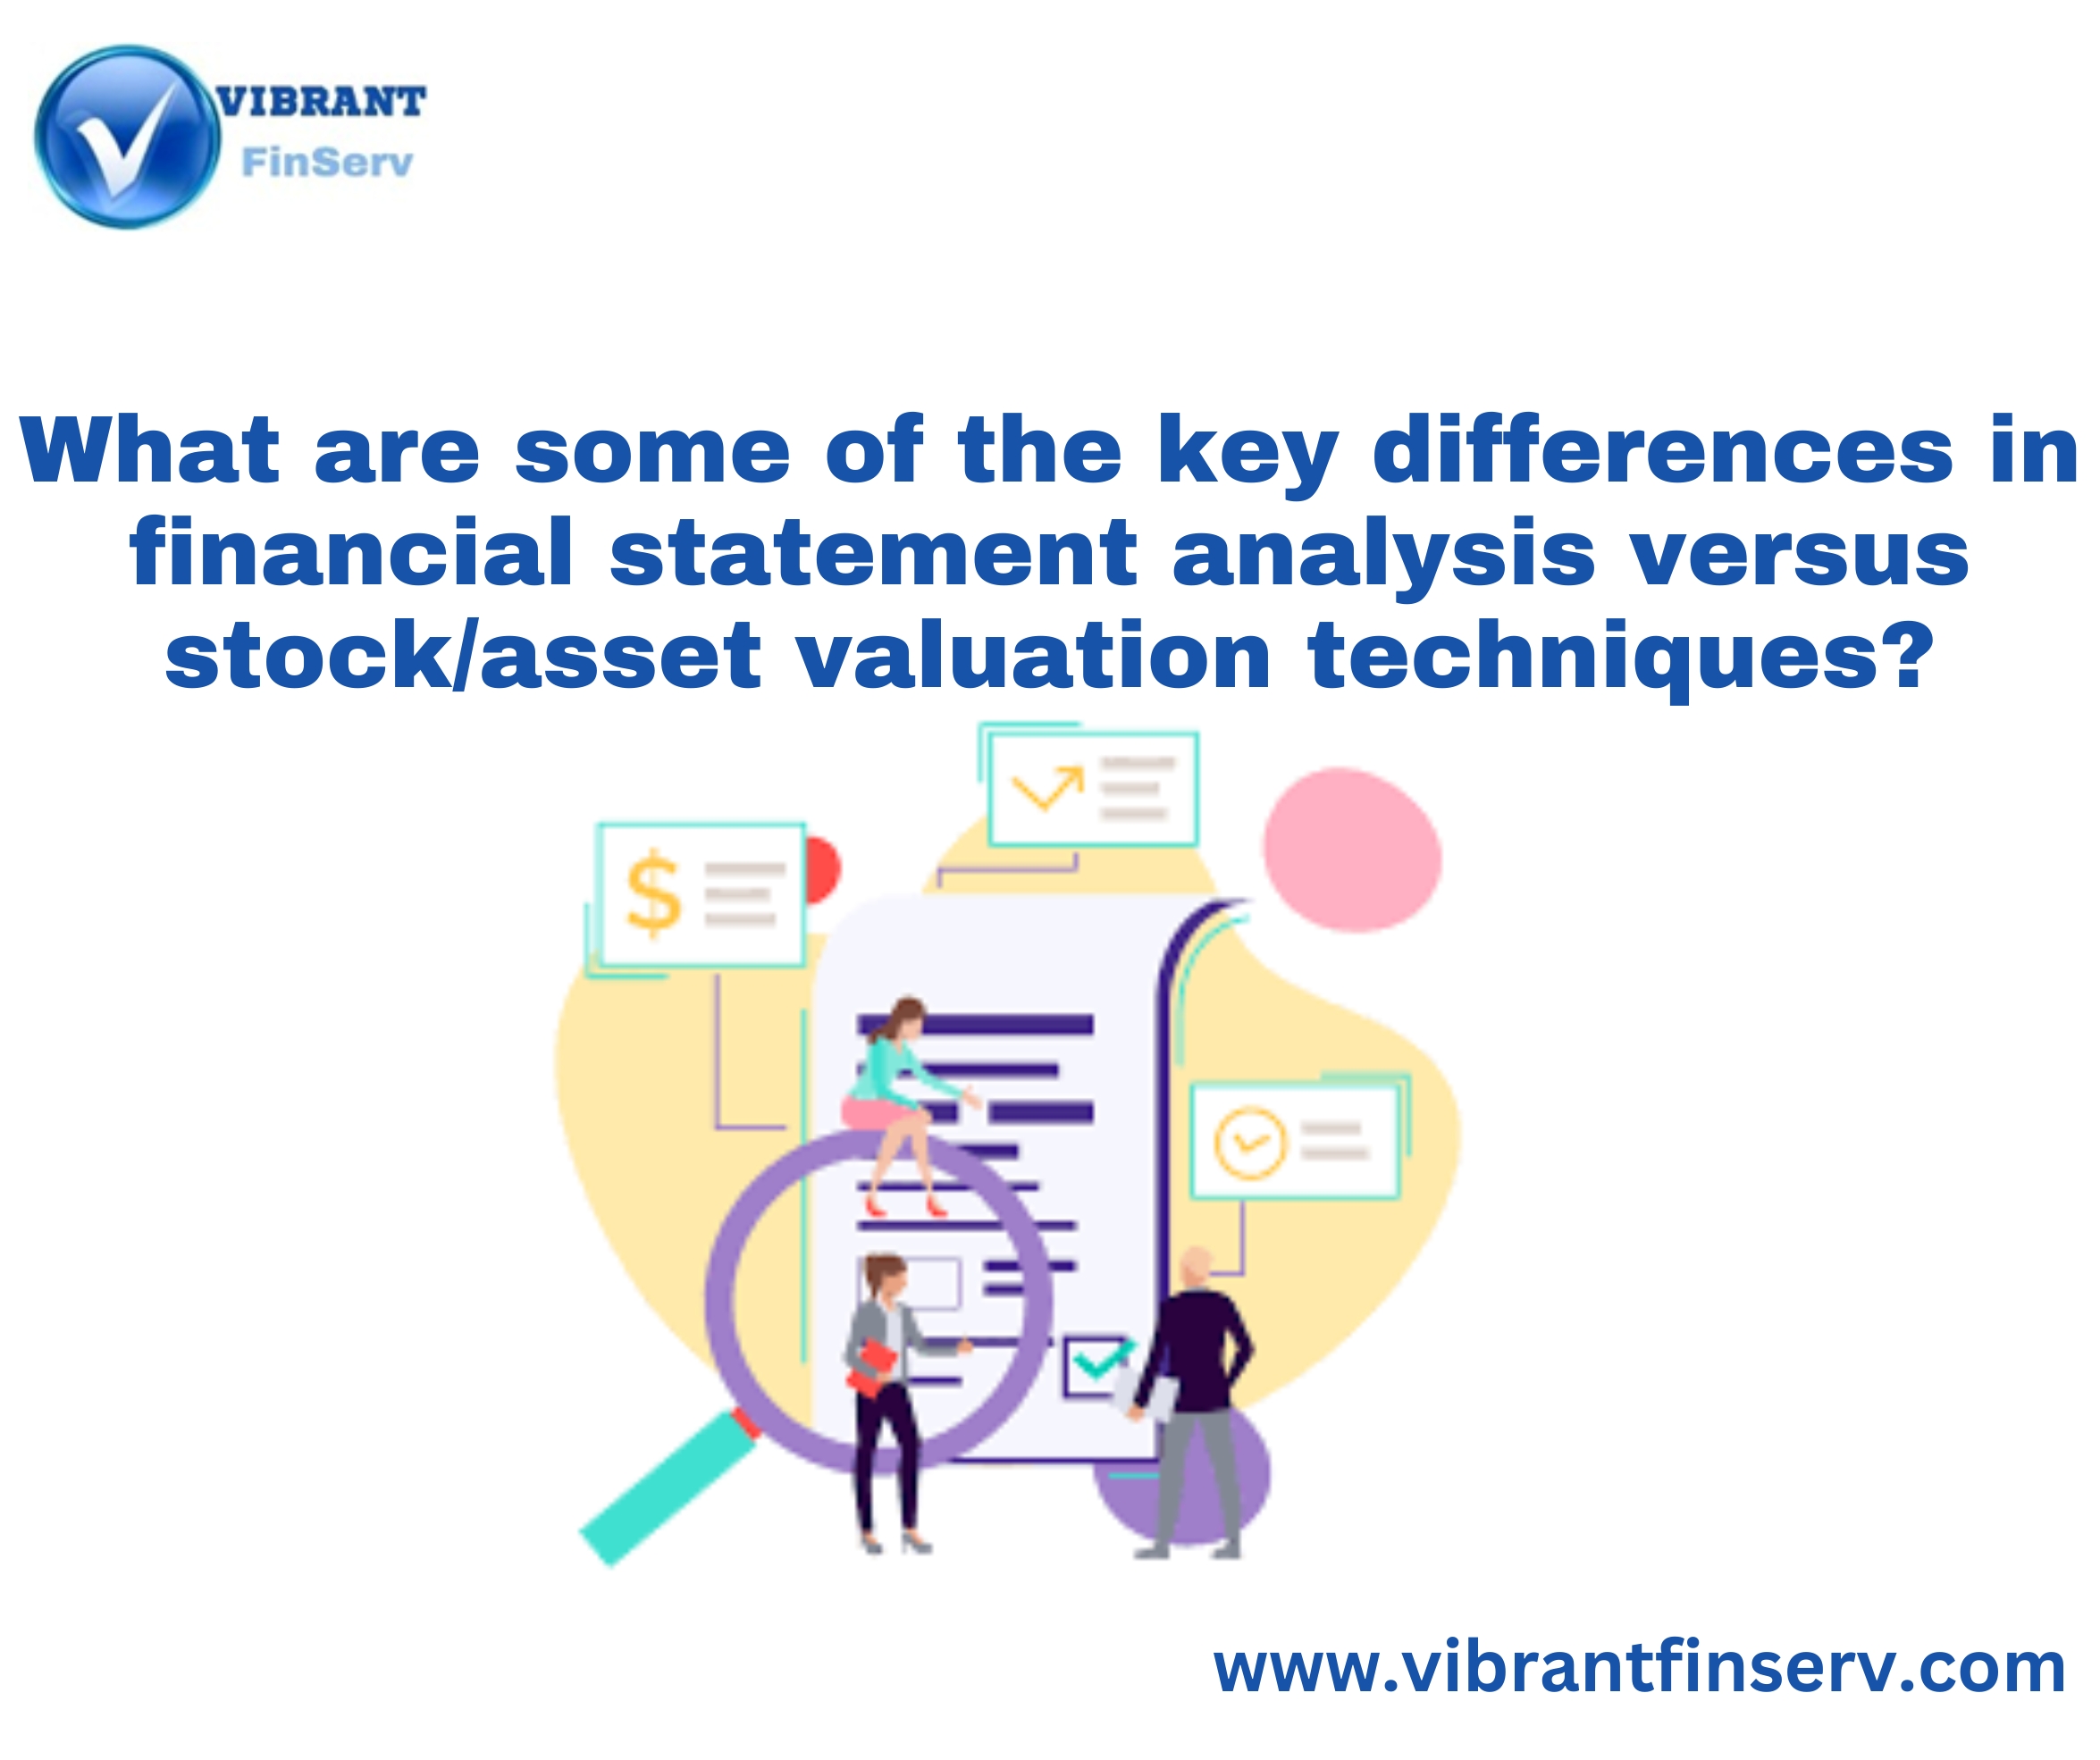  Difference between financial statement analysis and stock/asset valuation techniques